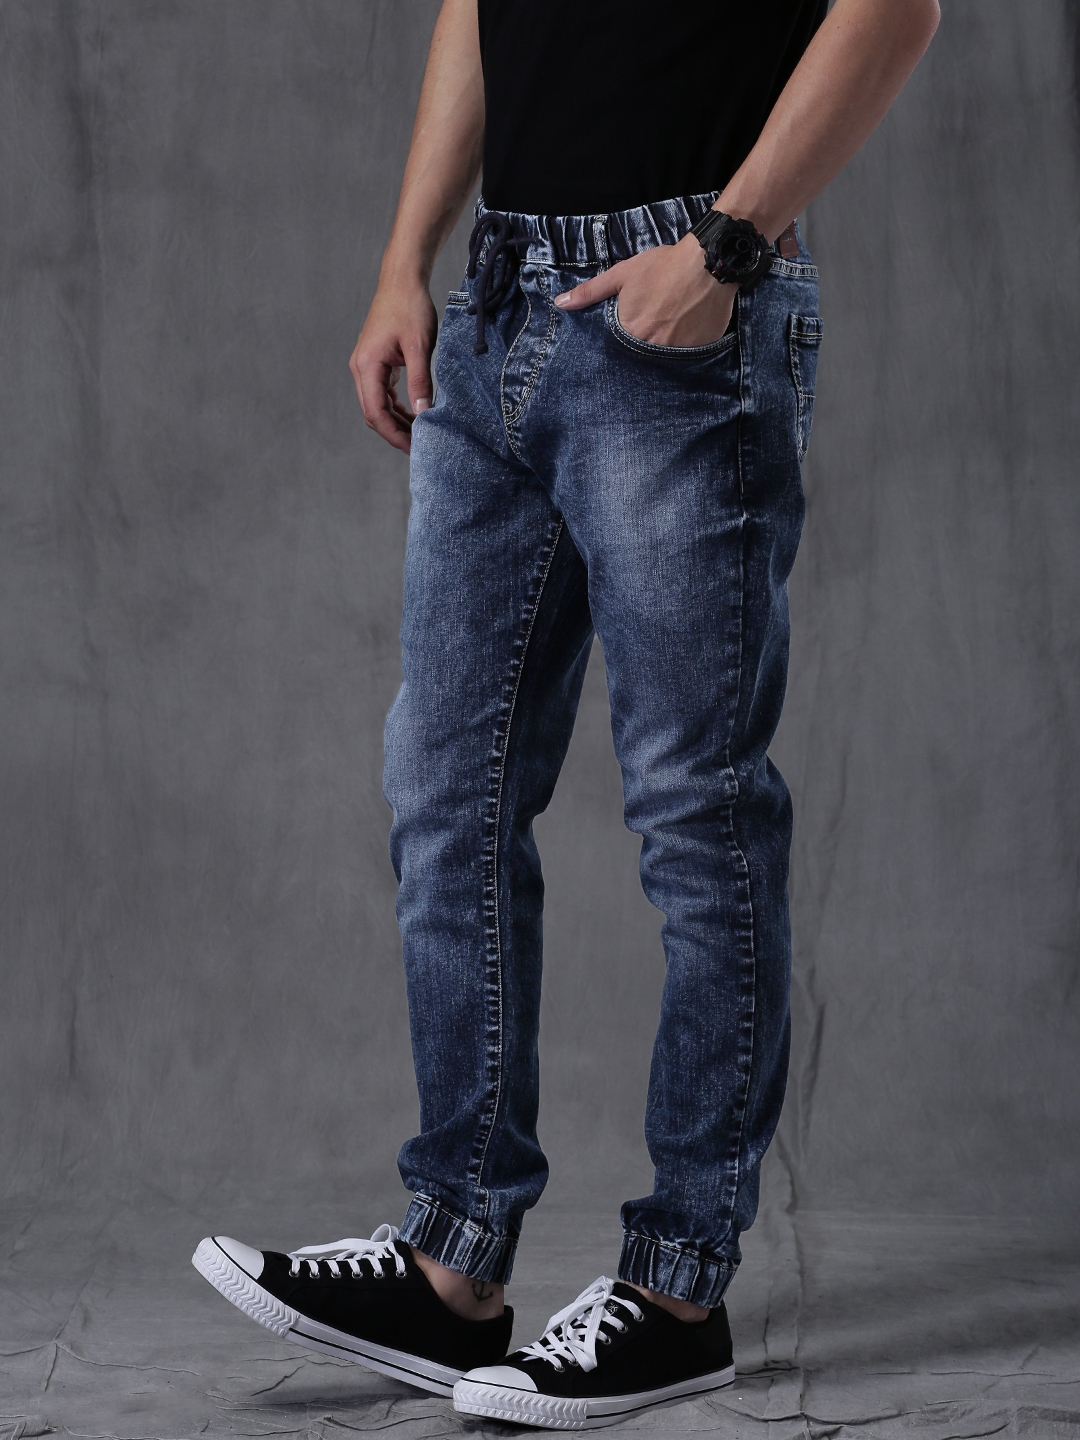 wrogn jeans price